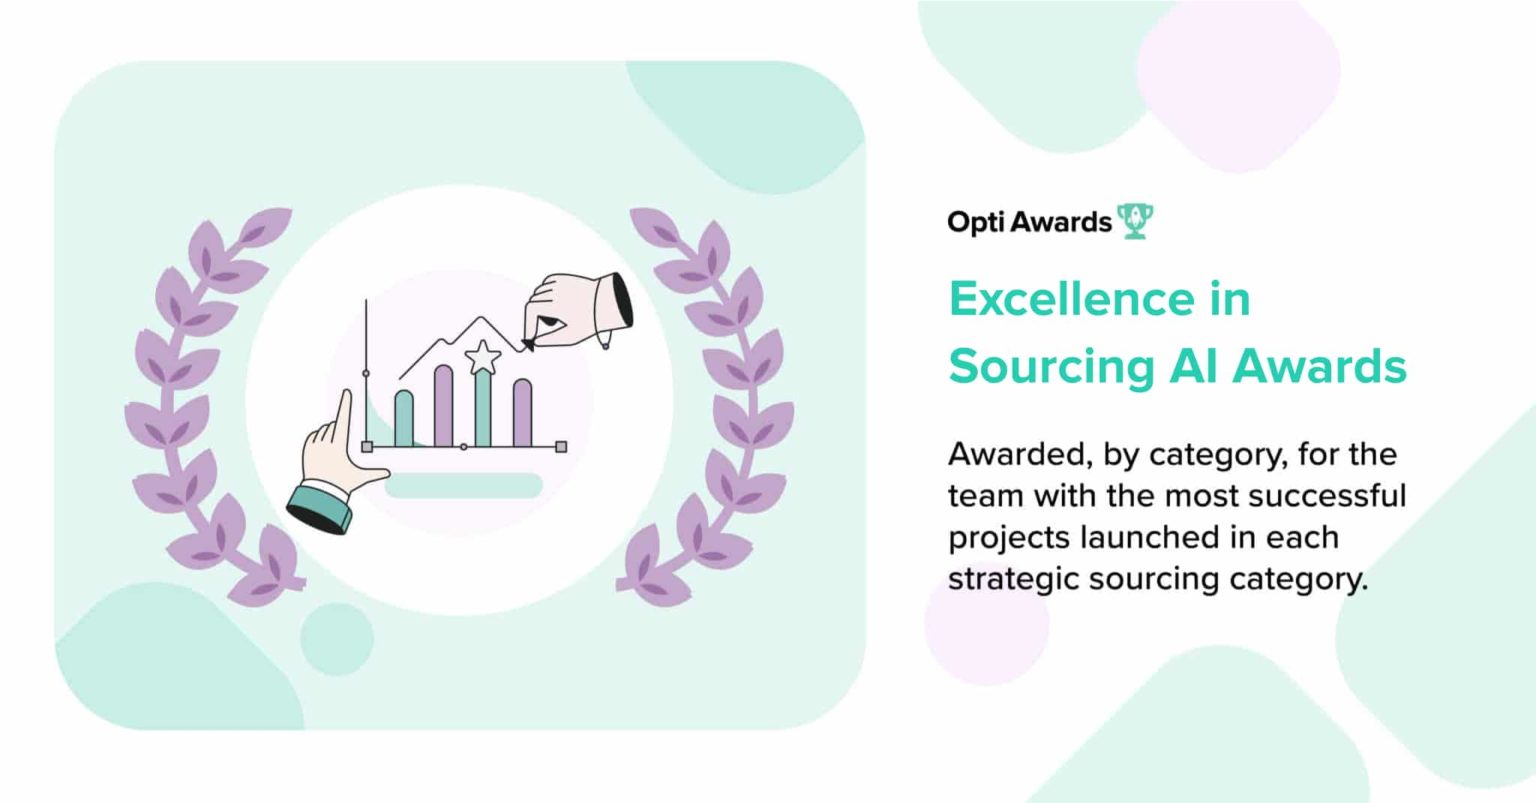 Excellence in Sourcing AI Awards